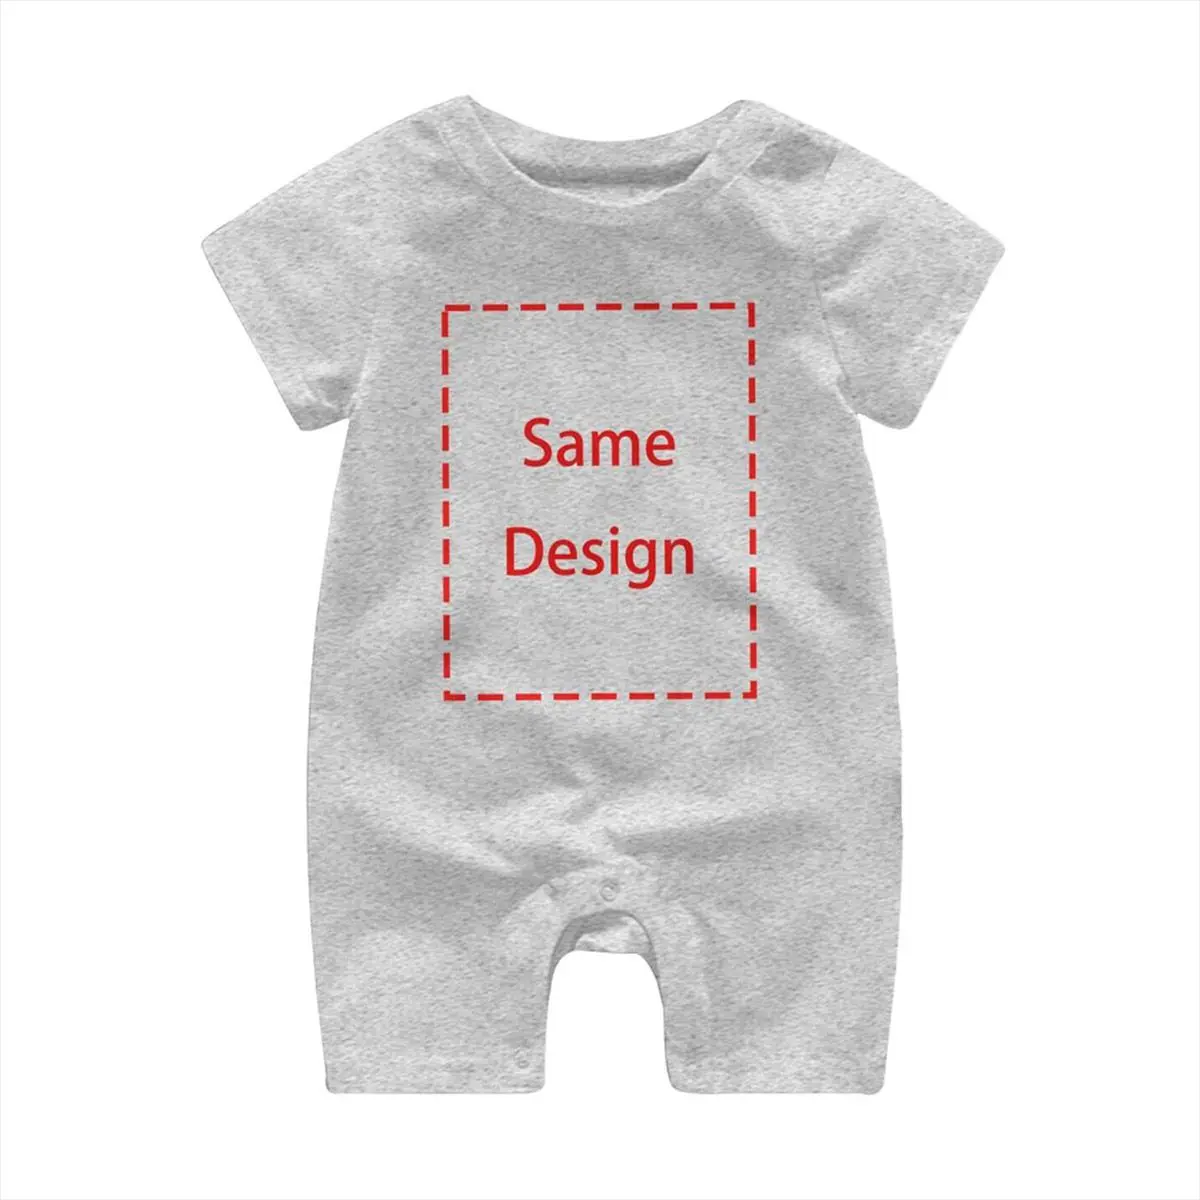 Baby Romper Suit PLUS a Baby Bib printed with FUTURE WESTERN STAR DRIVER 